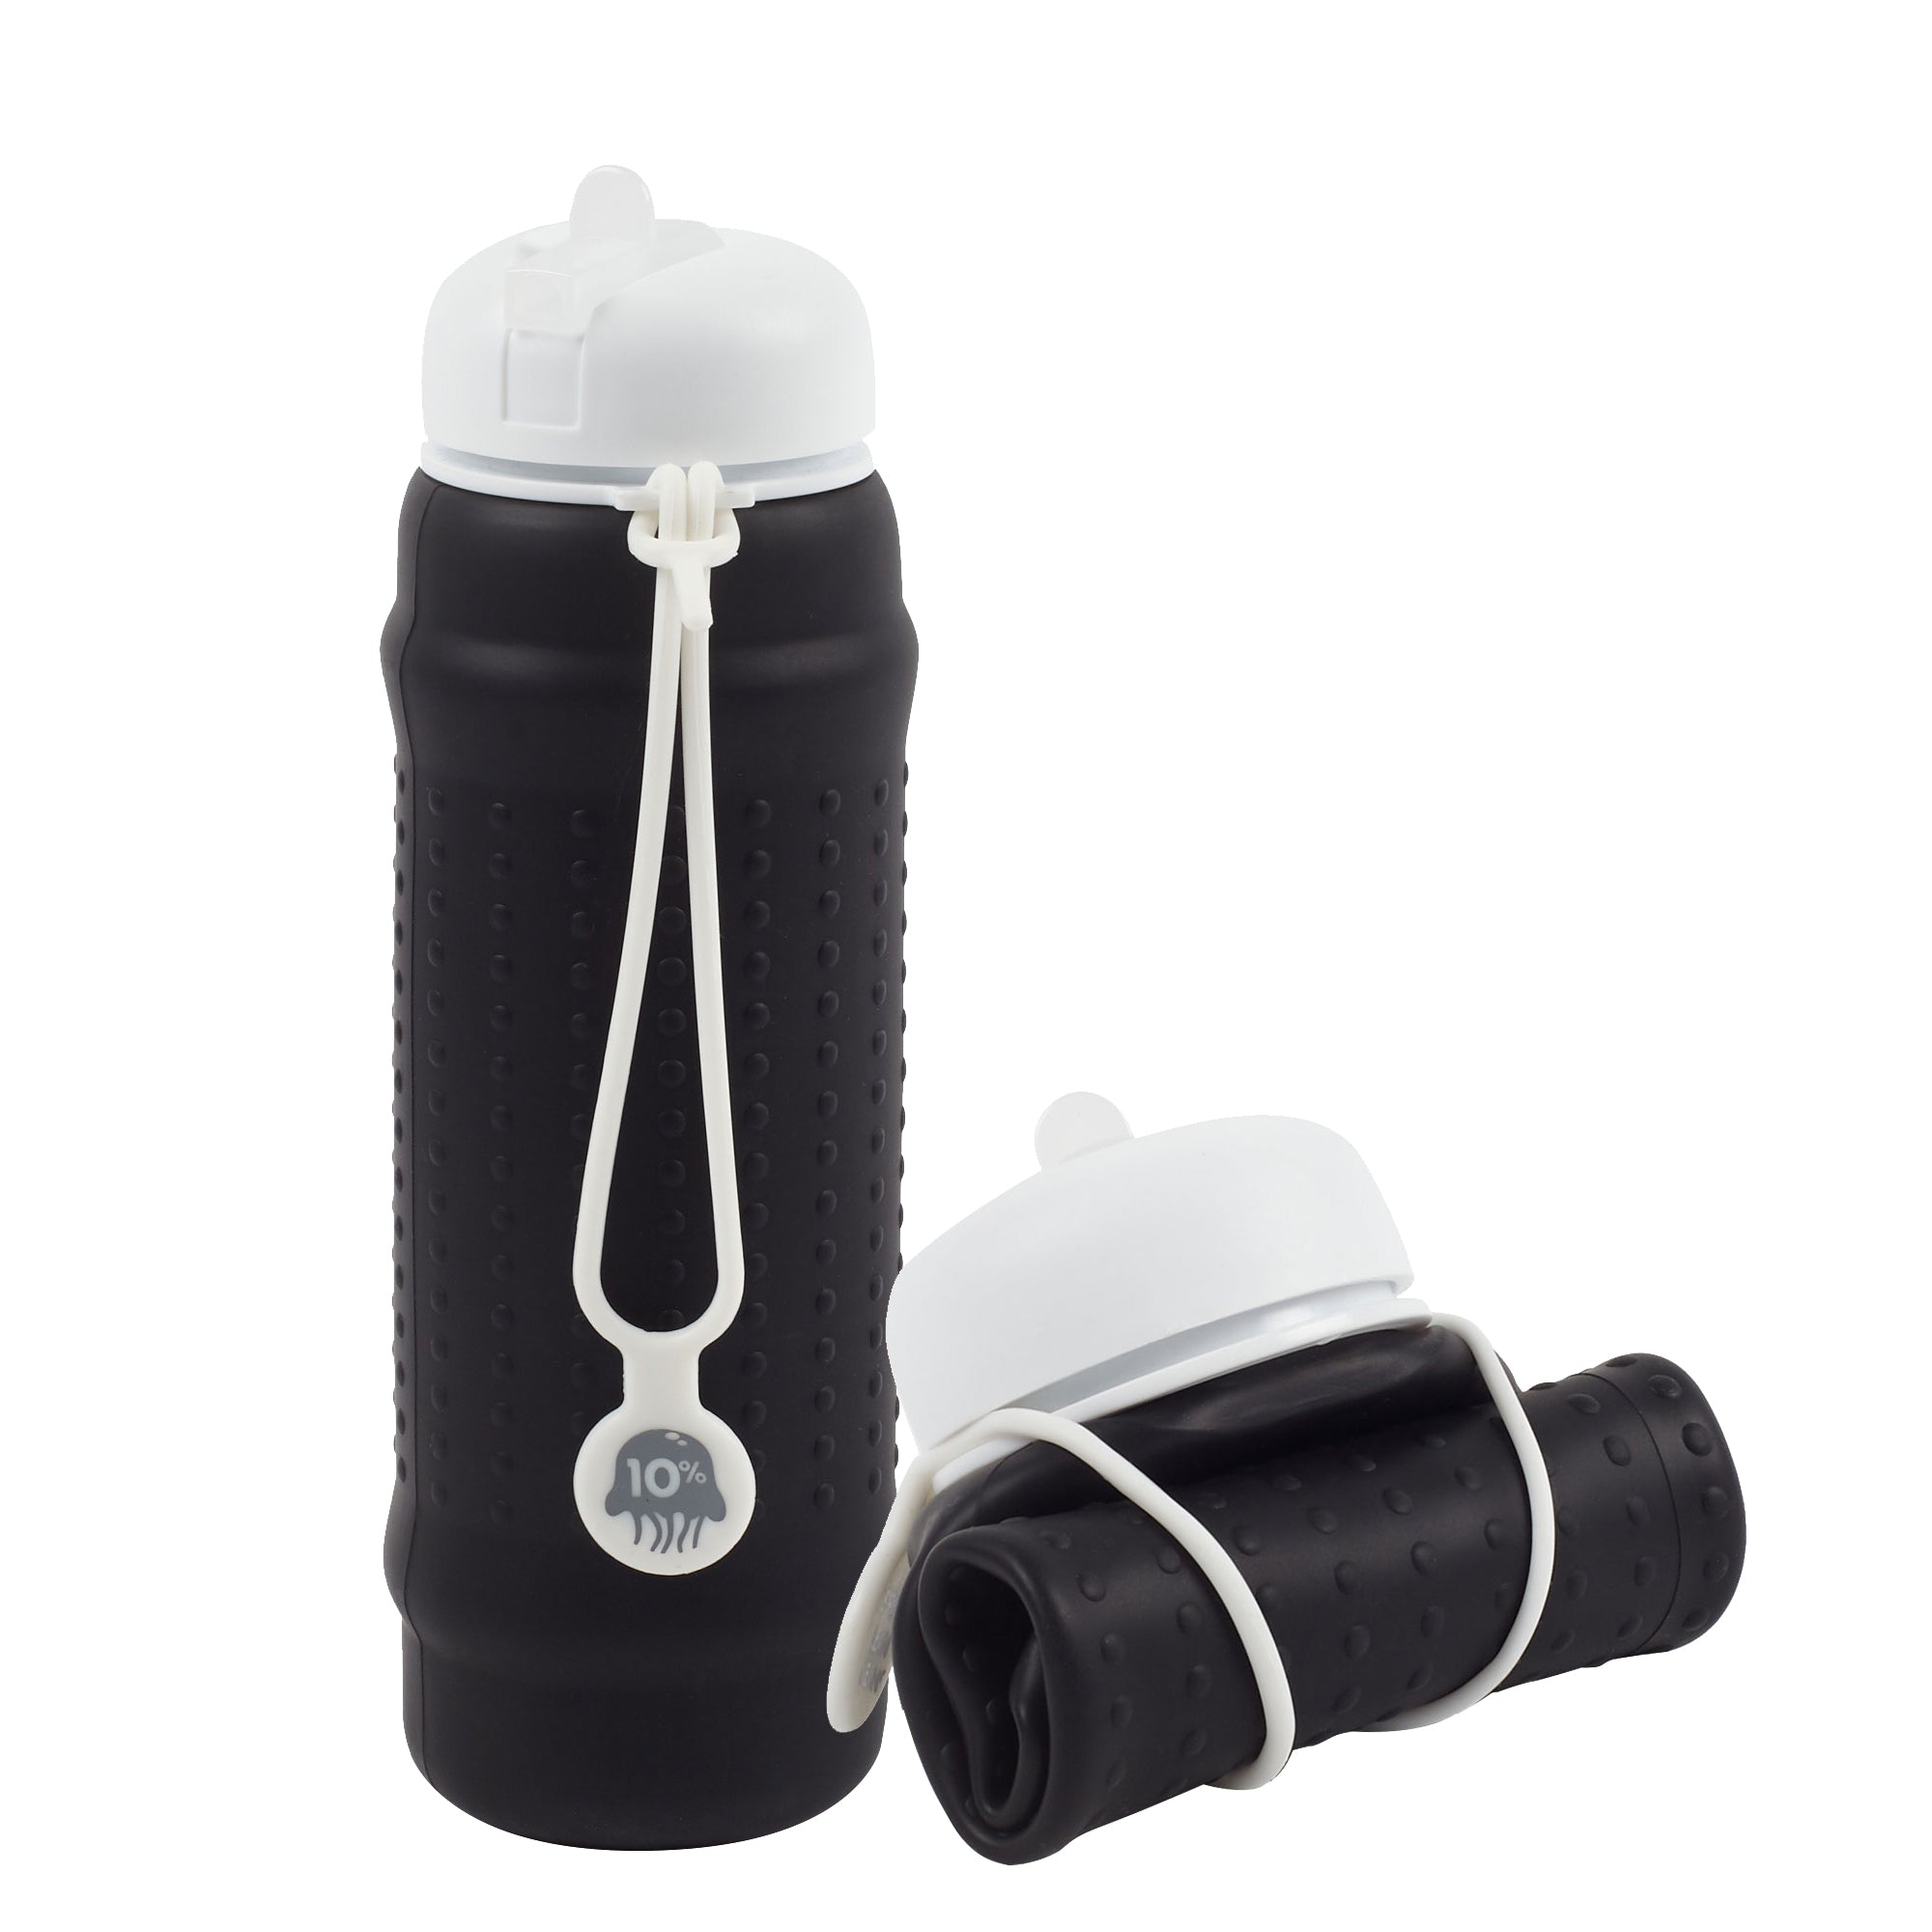 Rolla Bottle - Black, White Lid + White Strap - Tall and Rolled